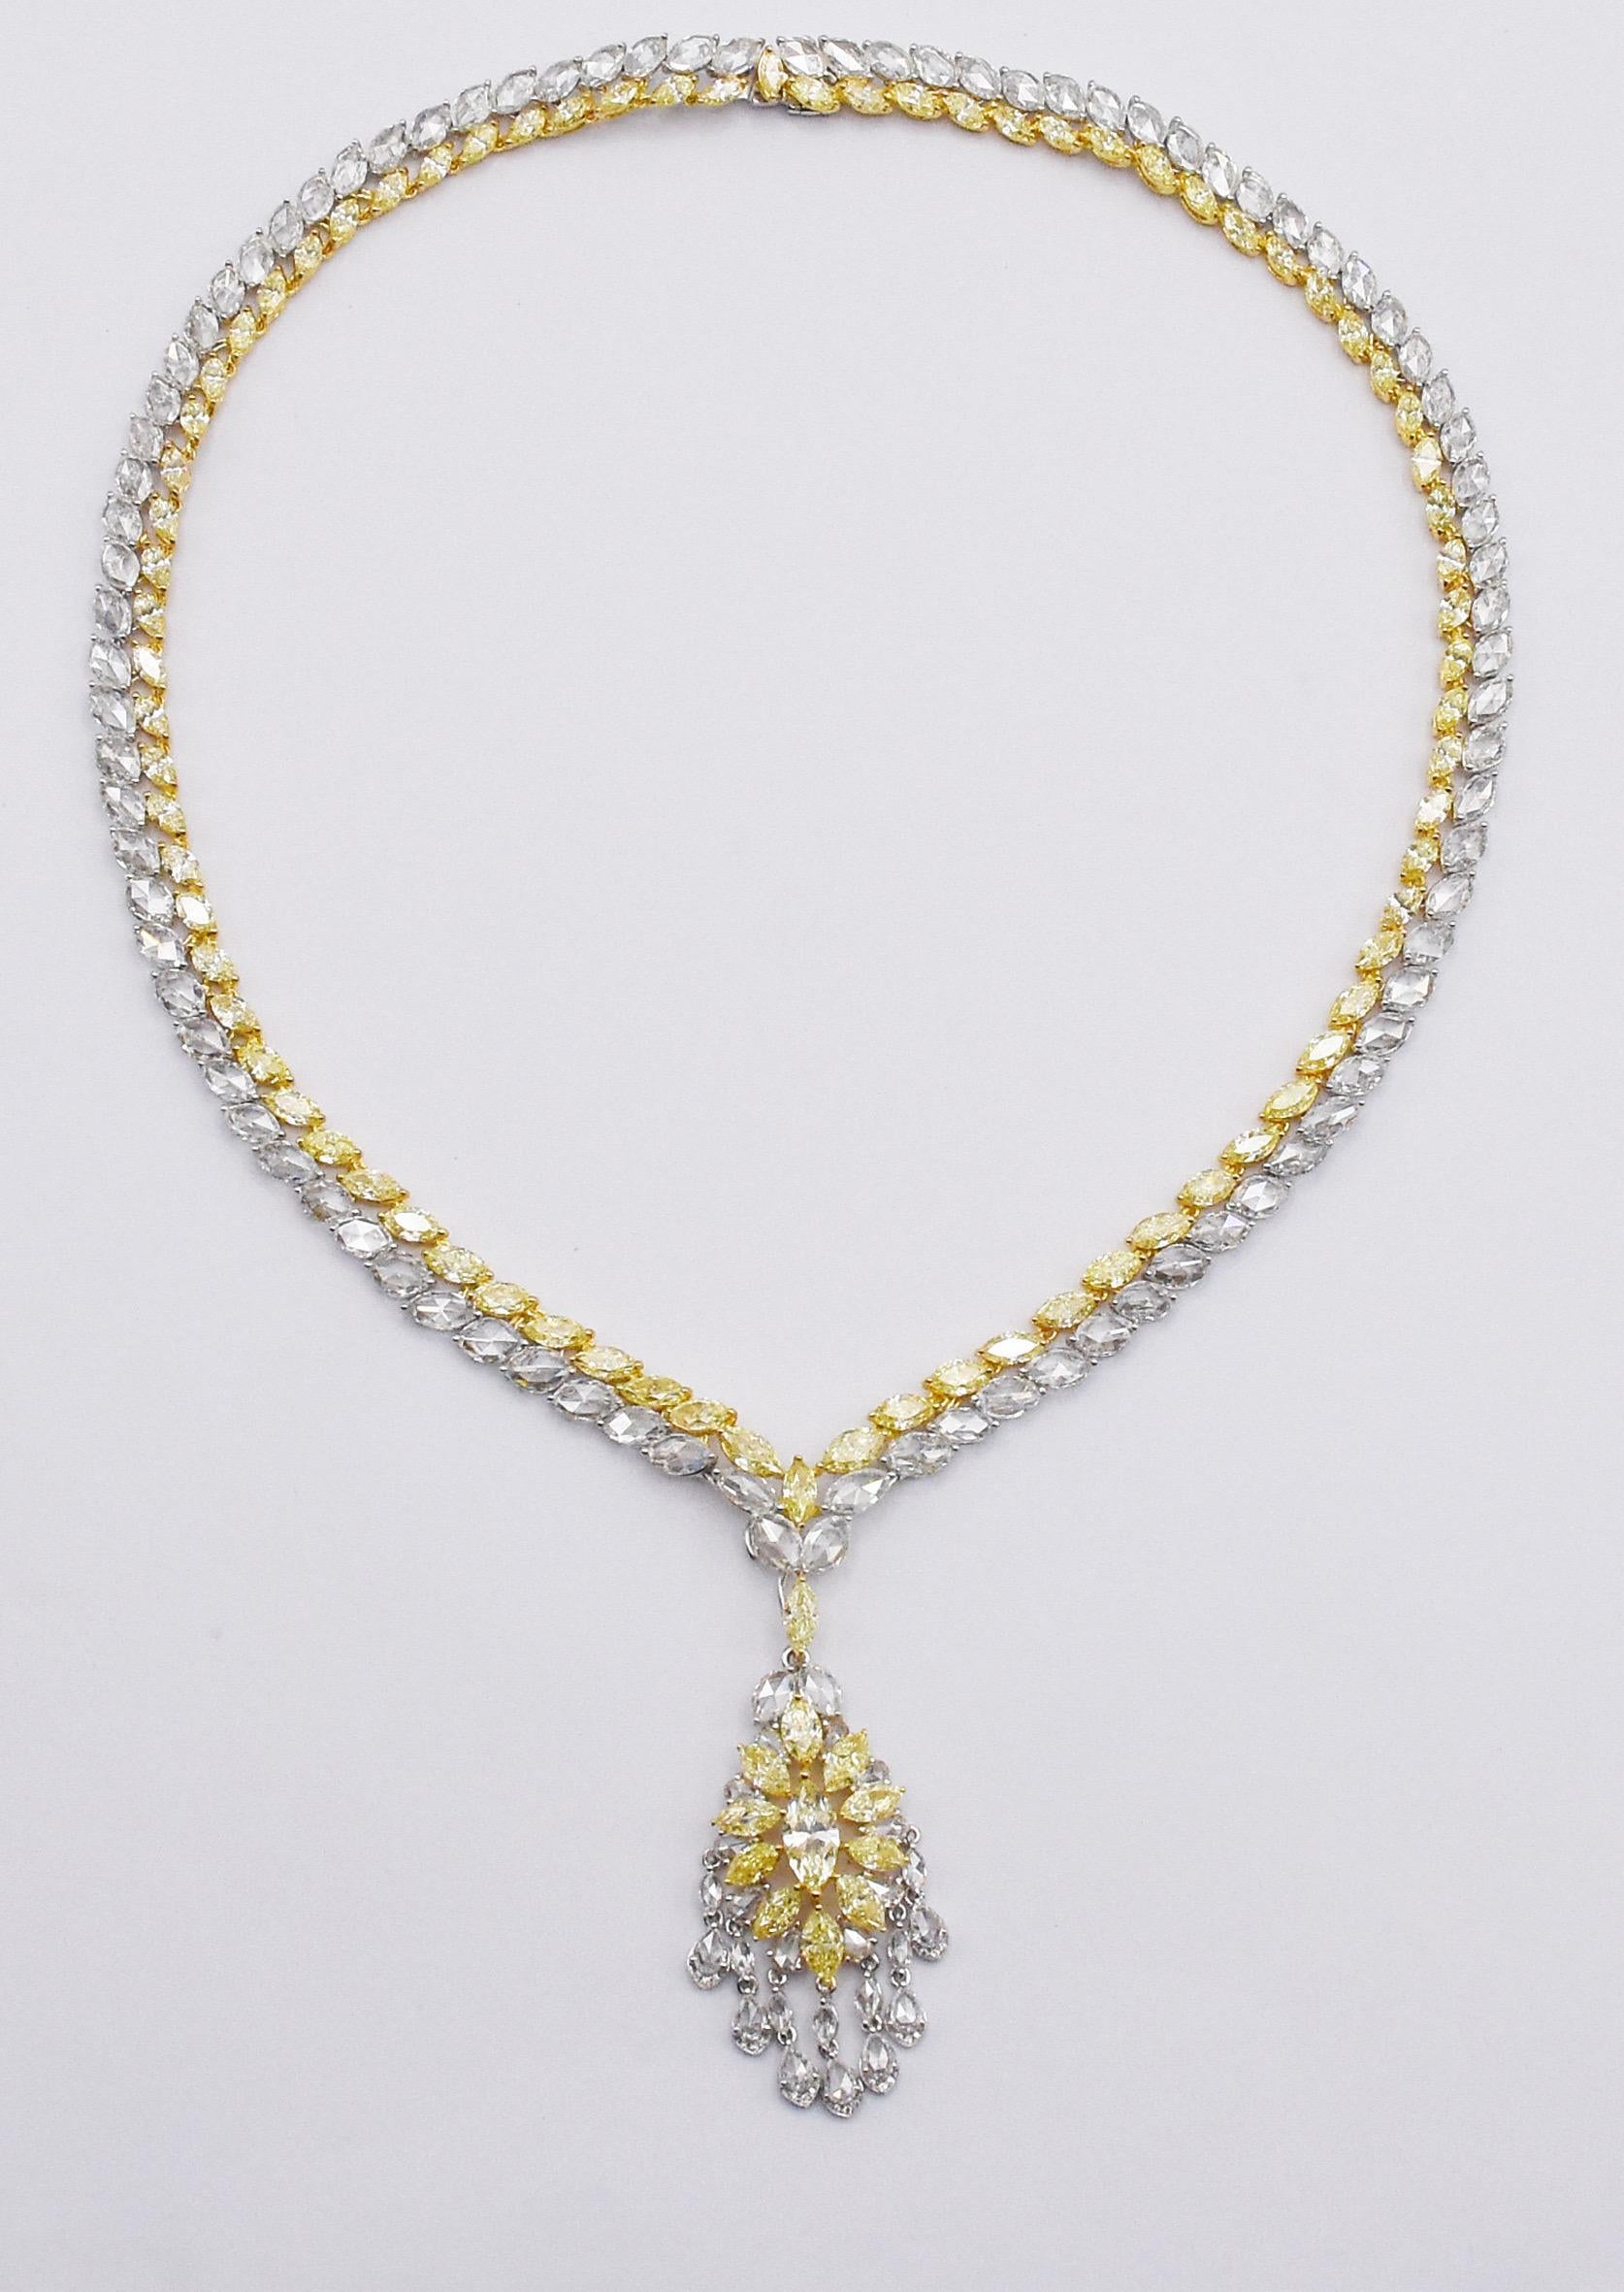 Emilio Jewelry 20.73 Carat Fancy Yellow Diamond Necklace In New Condition For Sale In New York, NY